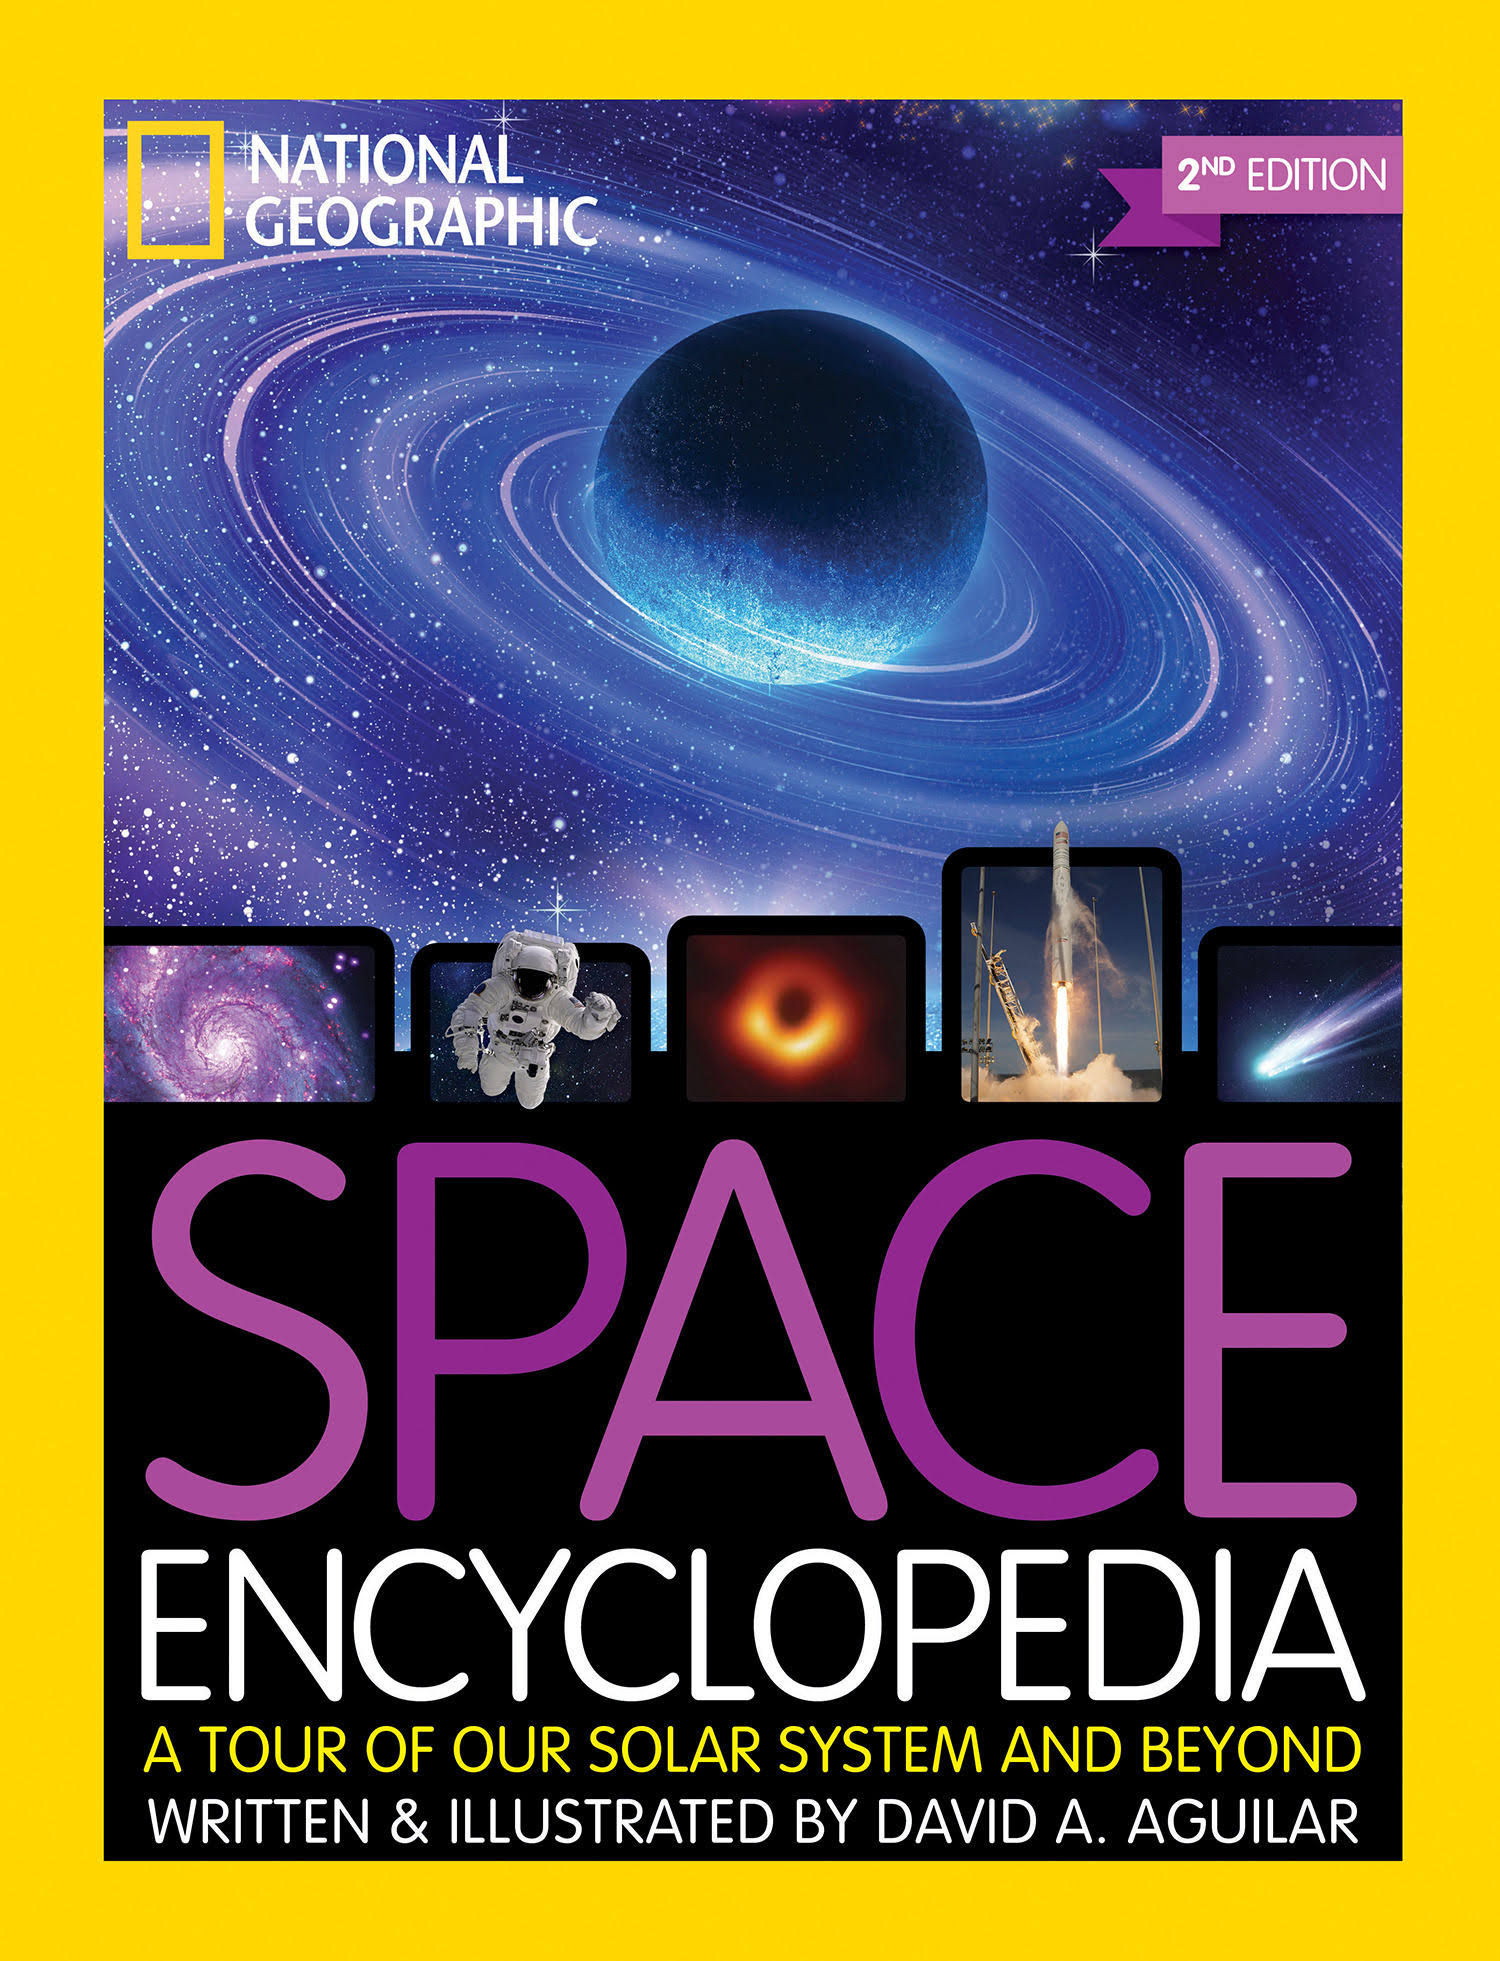 Space Encyclopedia, 2nd Edition: A Tour of Our Solar System and Beyond [Book]